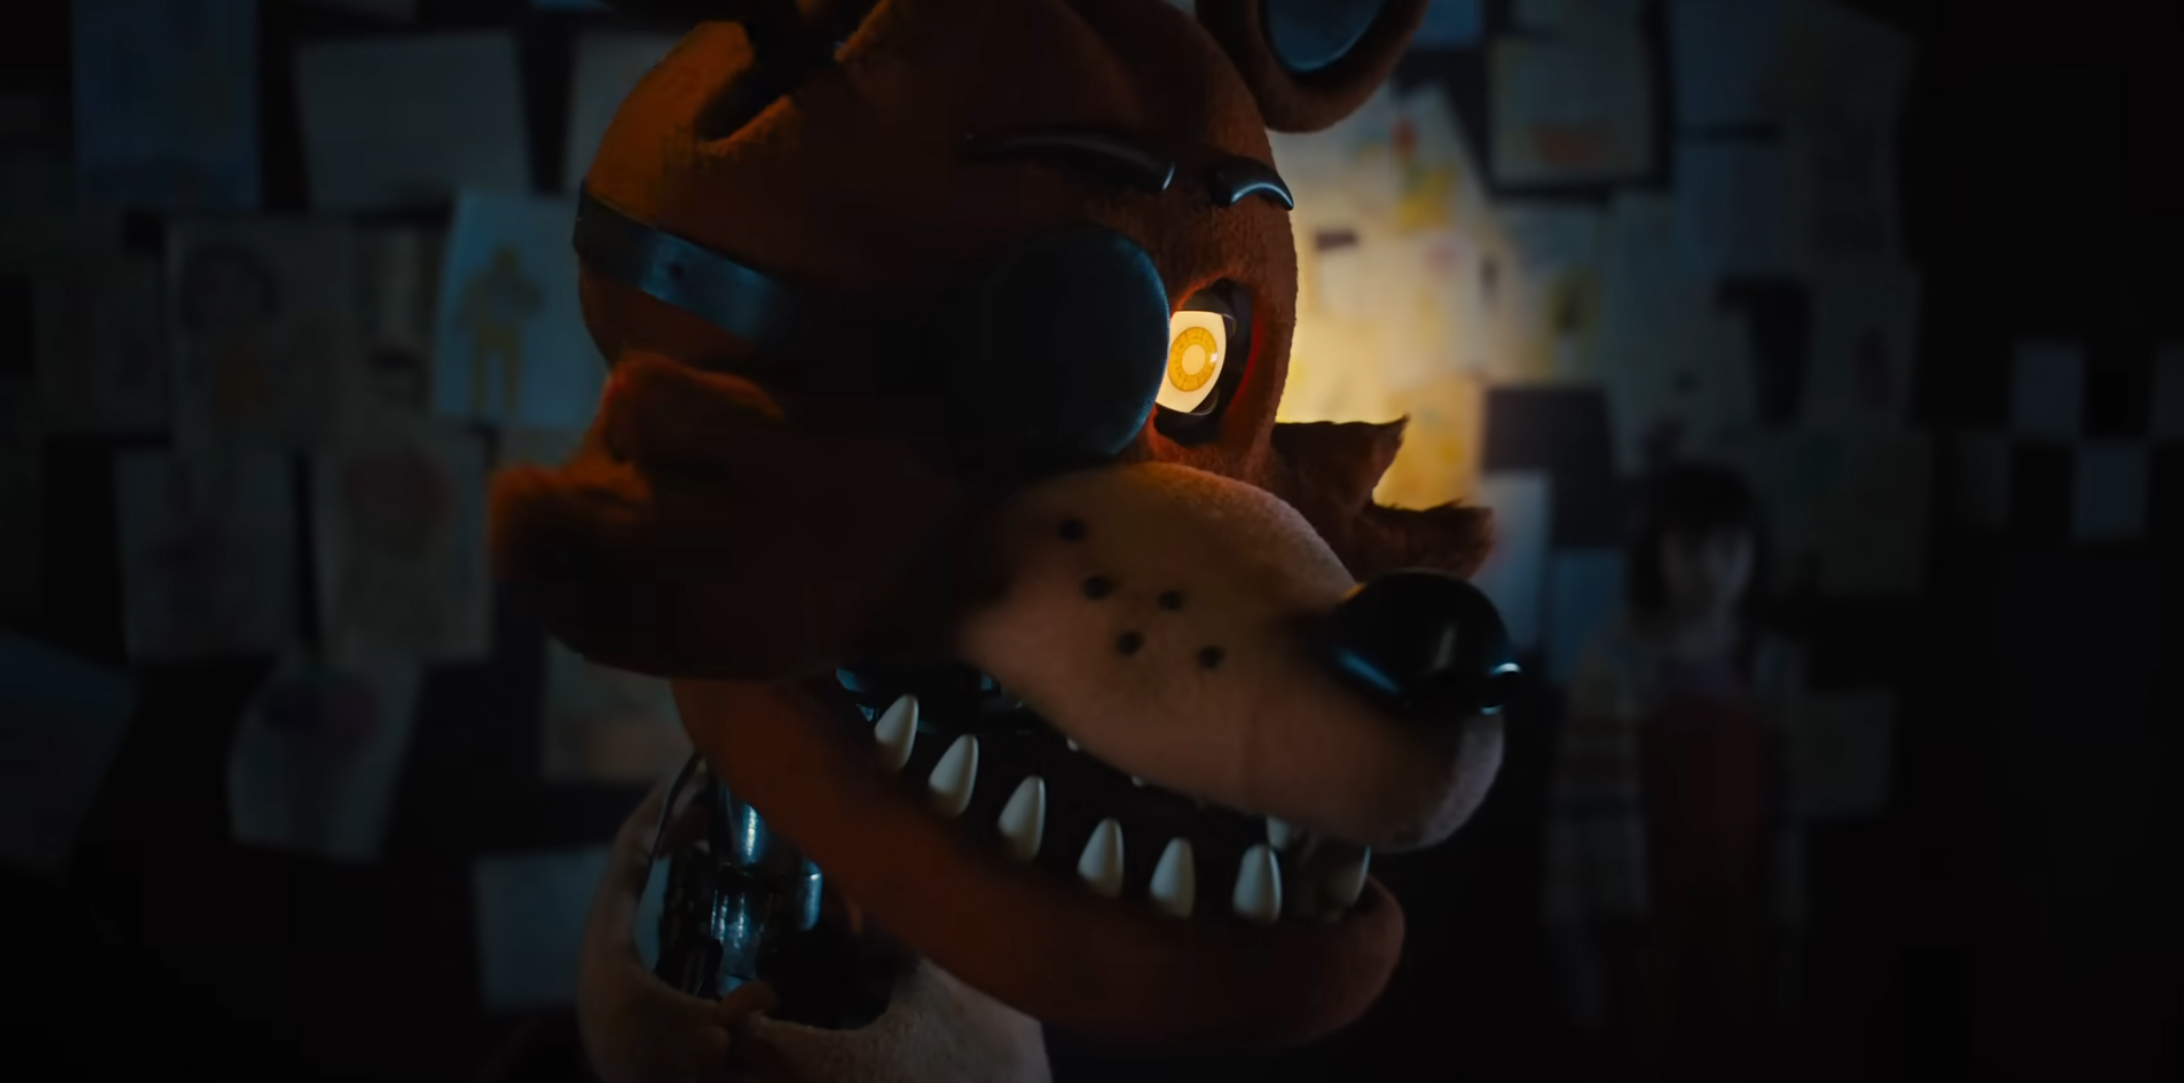 Five Nights At Freddy's – Final Trailer 2023